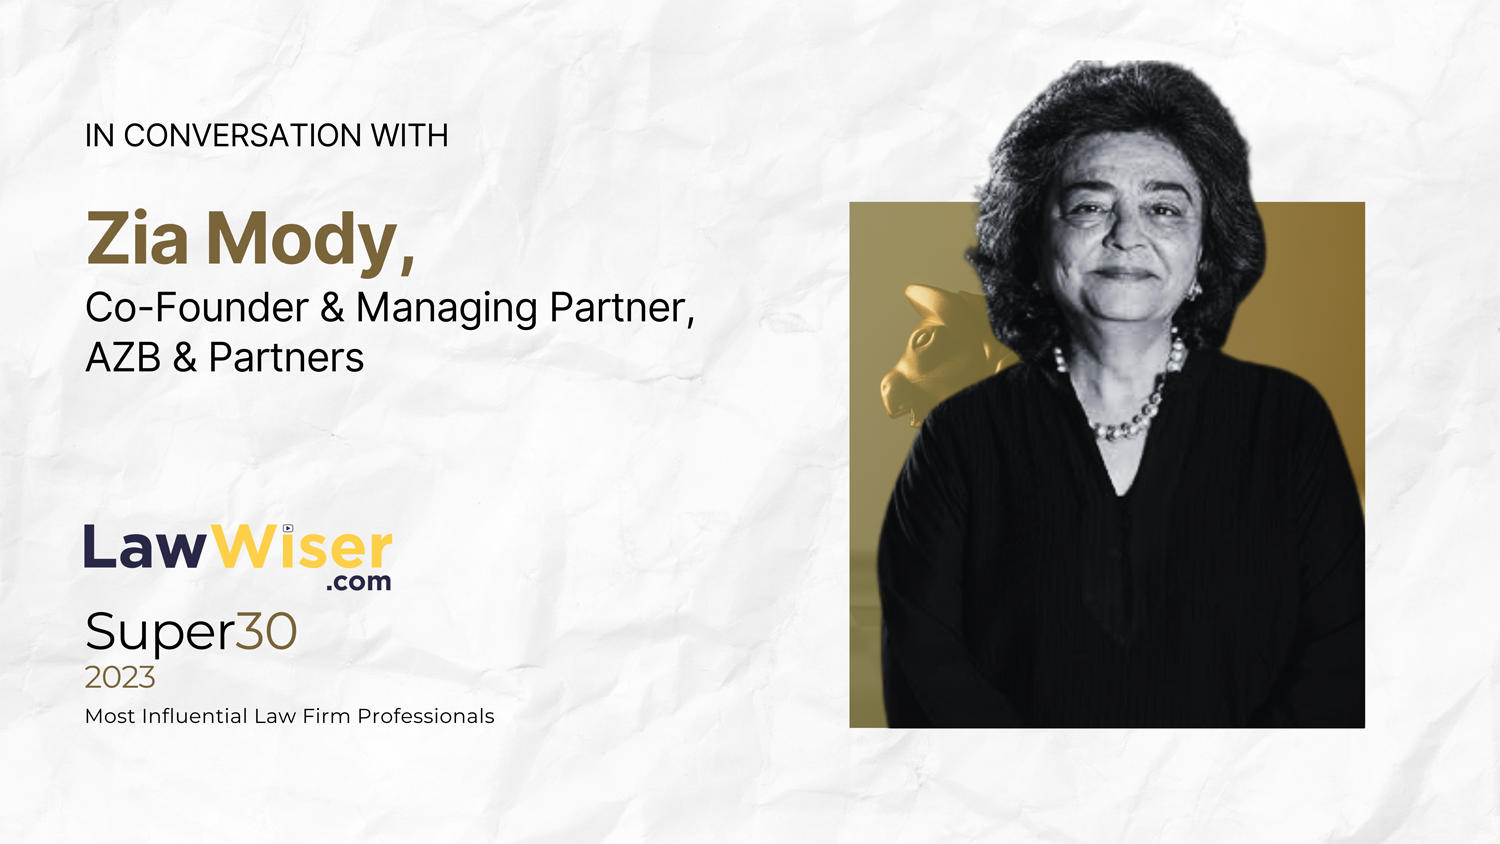 Here is a quick conversation with Zia Mody, Co-Founder & Managing Partner, AZB & Partners, who was recently listed in LawWiser Super 30 – Most Influential Law firm Professionals